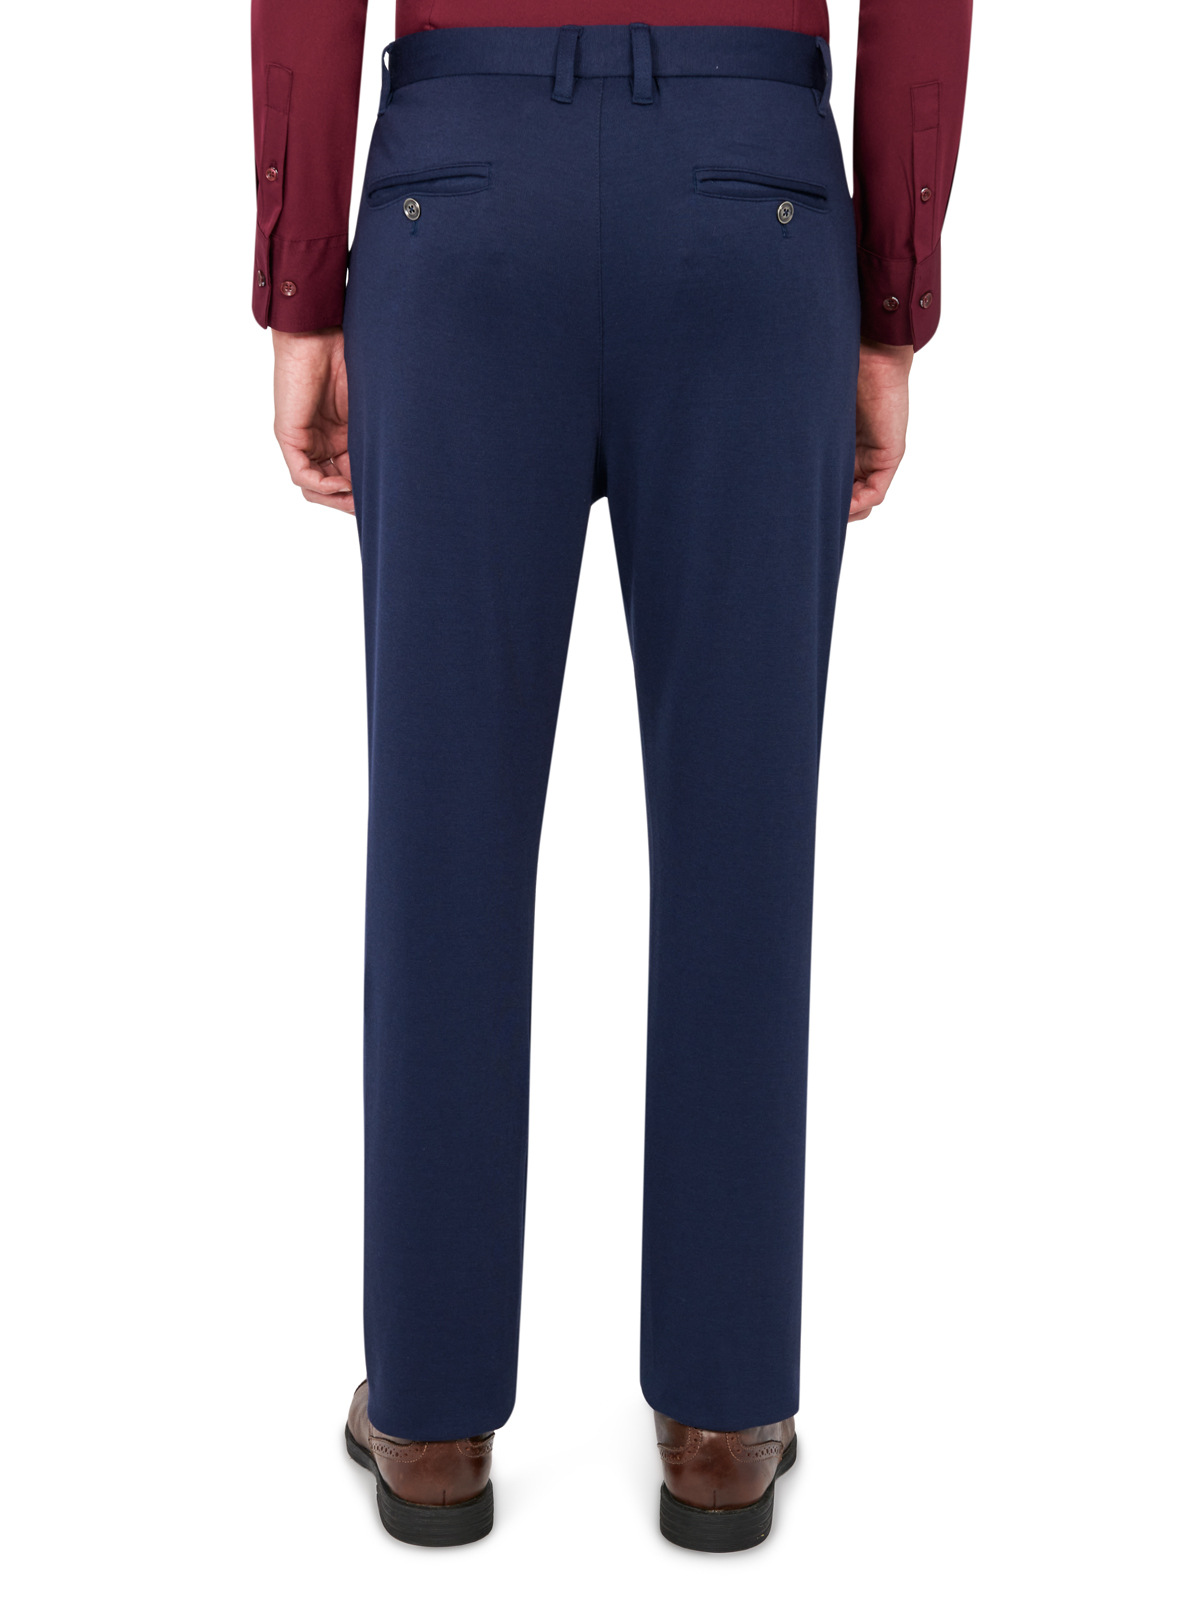 SOLID STRETCH KNIT PANTS